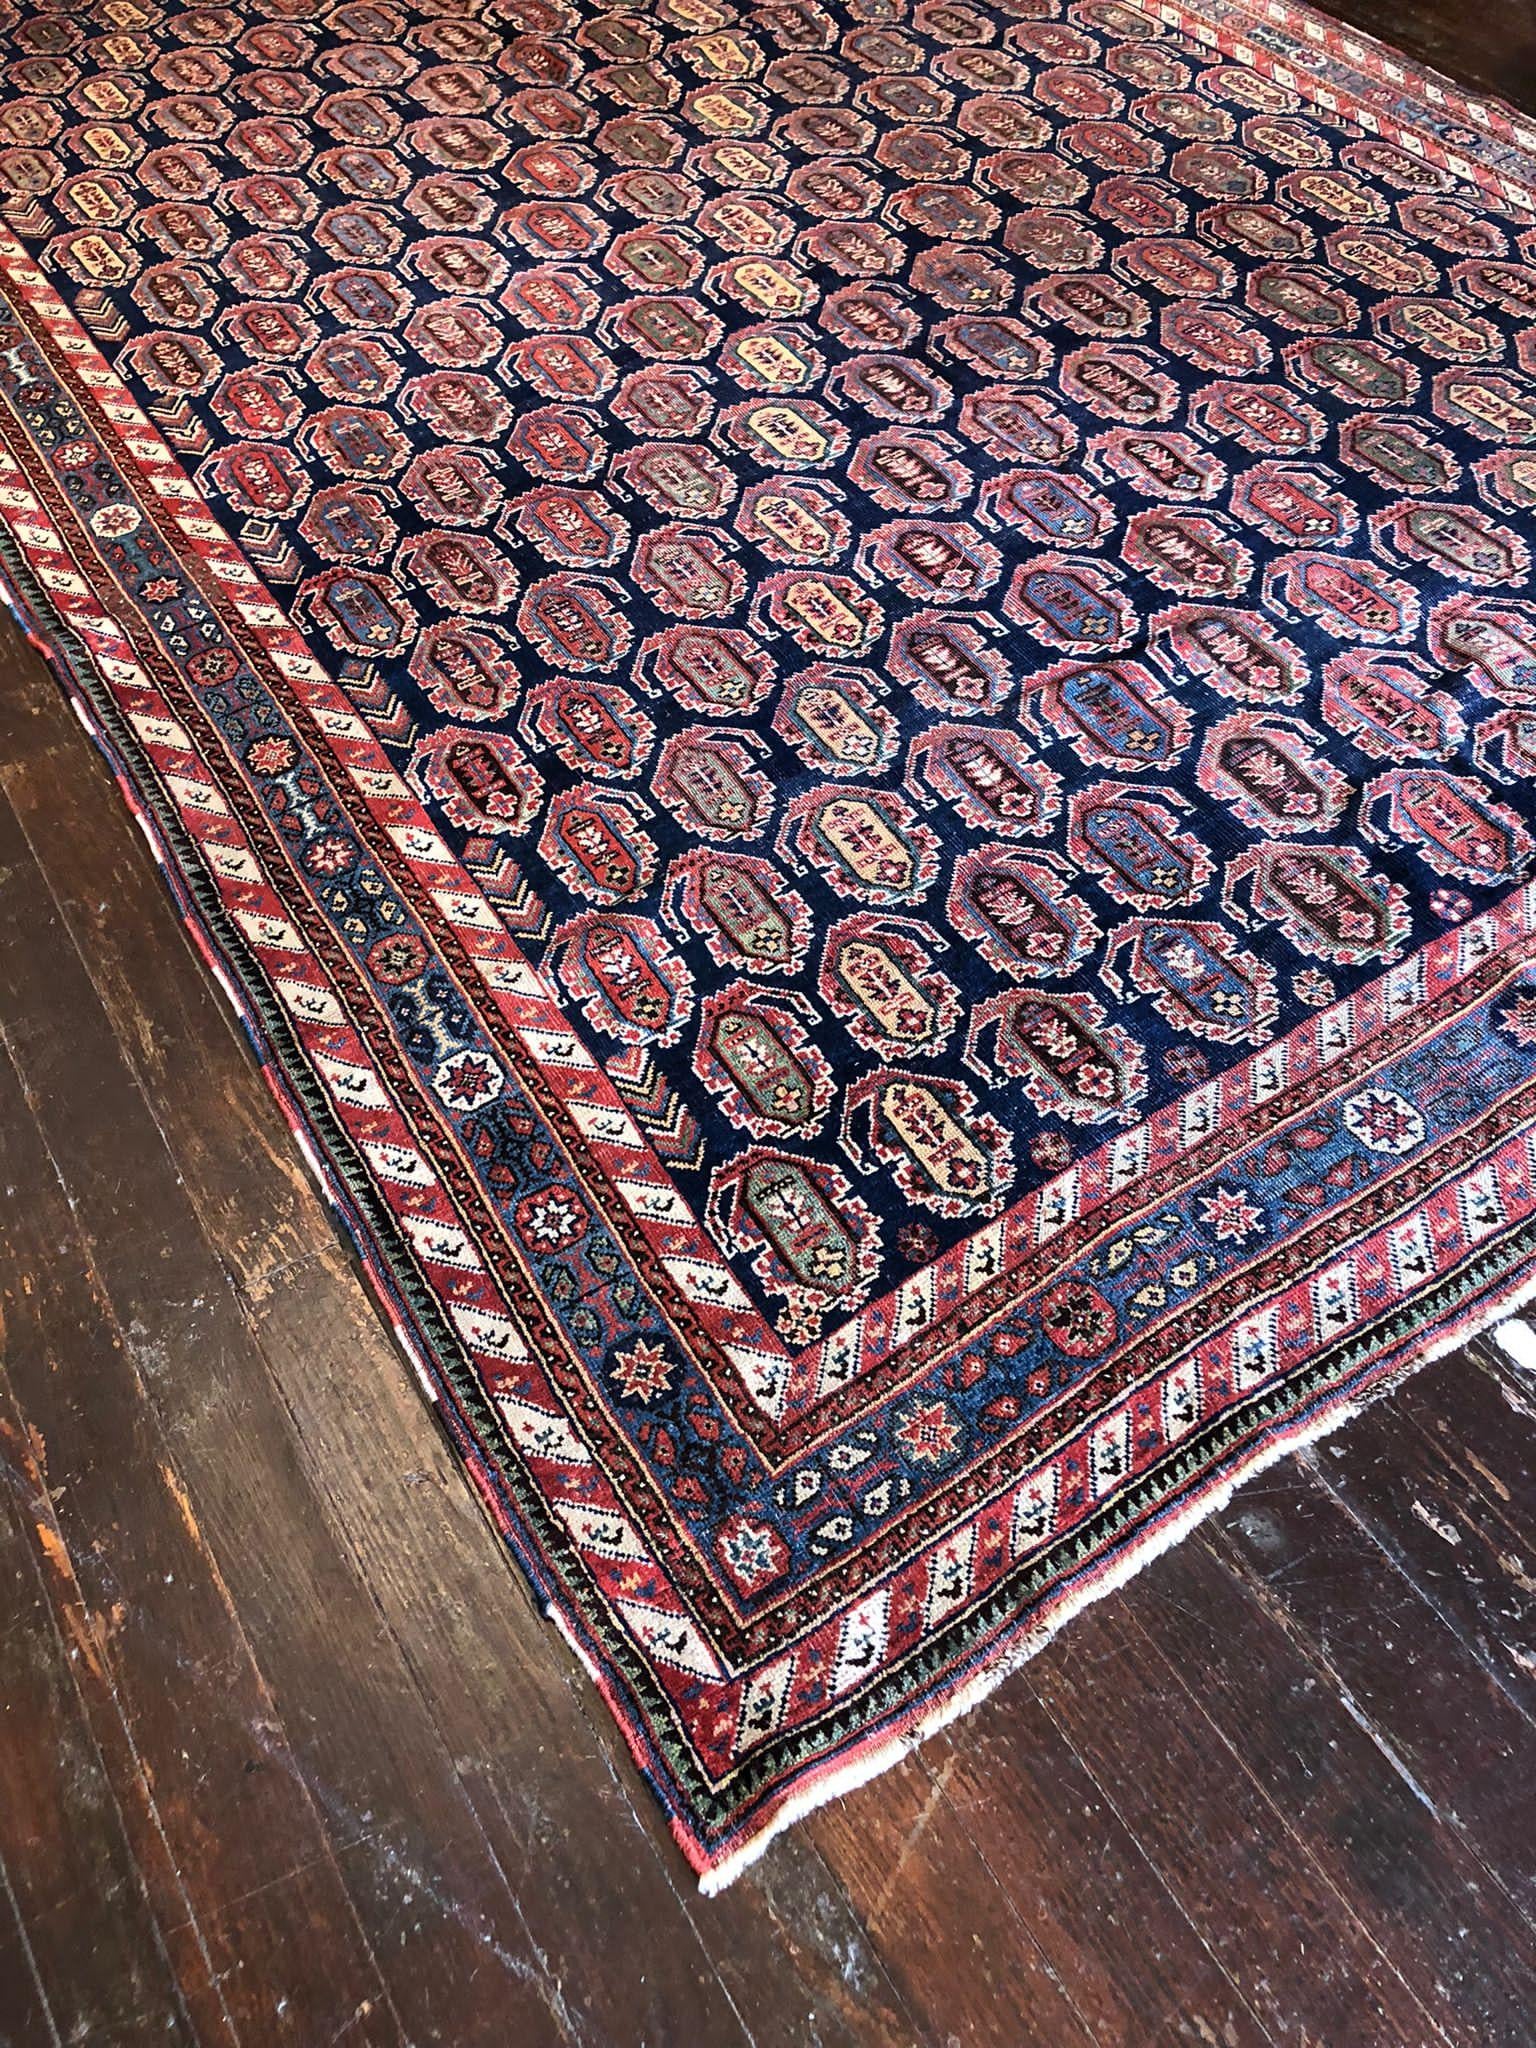 A magnificent Vintage Shiraz Rug is a testament to the beauty of traditional Persian craftsmanship, known for its bold colors and striking patterns. This particular rug is an exquisite piece that captures the essence of the Shiraz rug-making